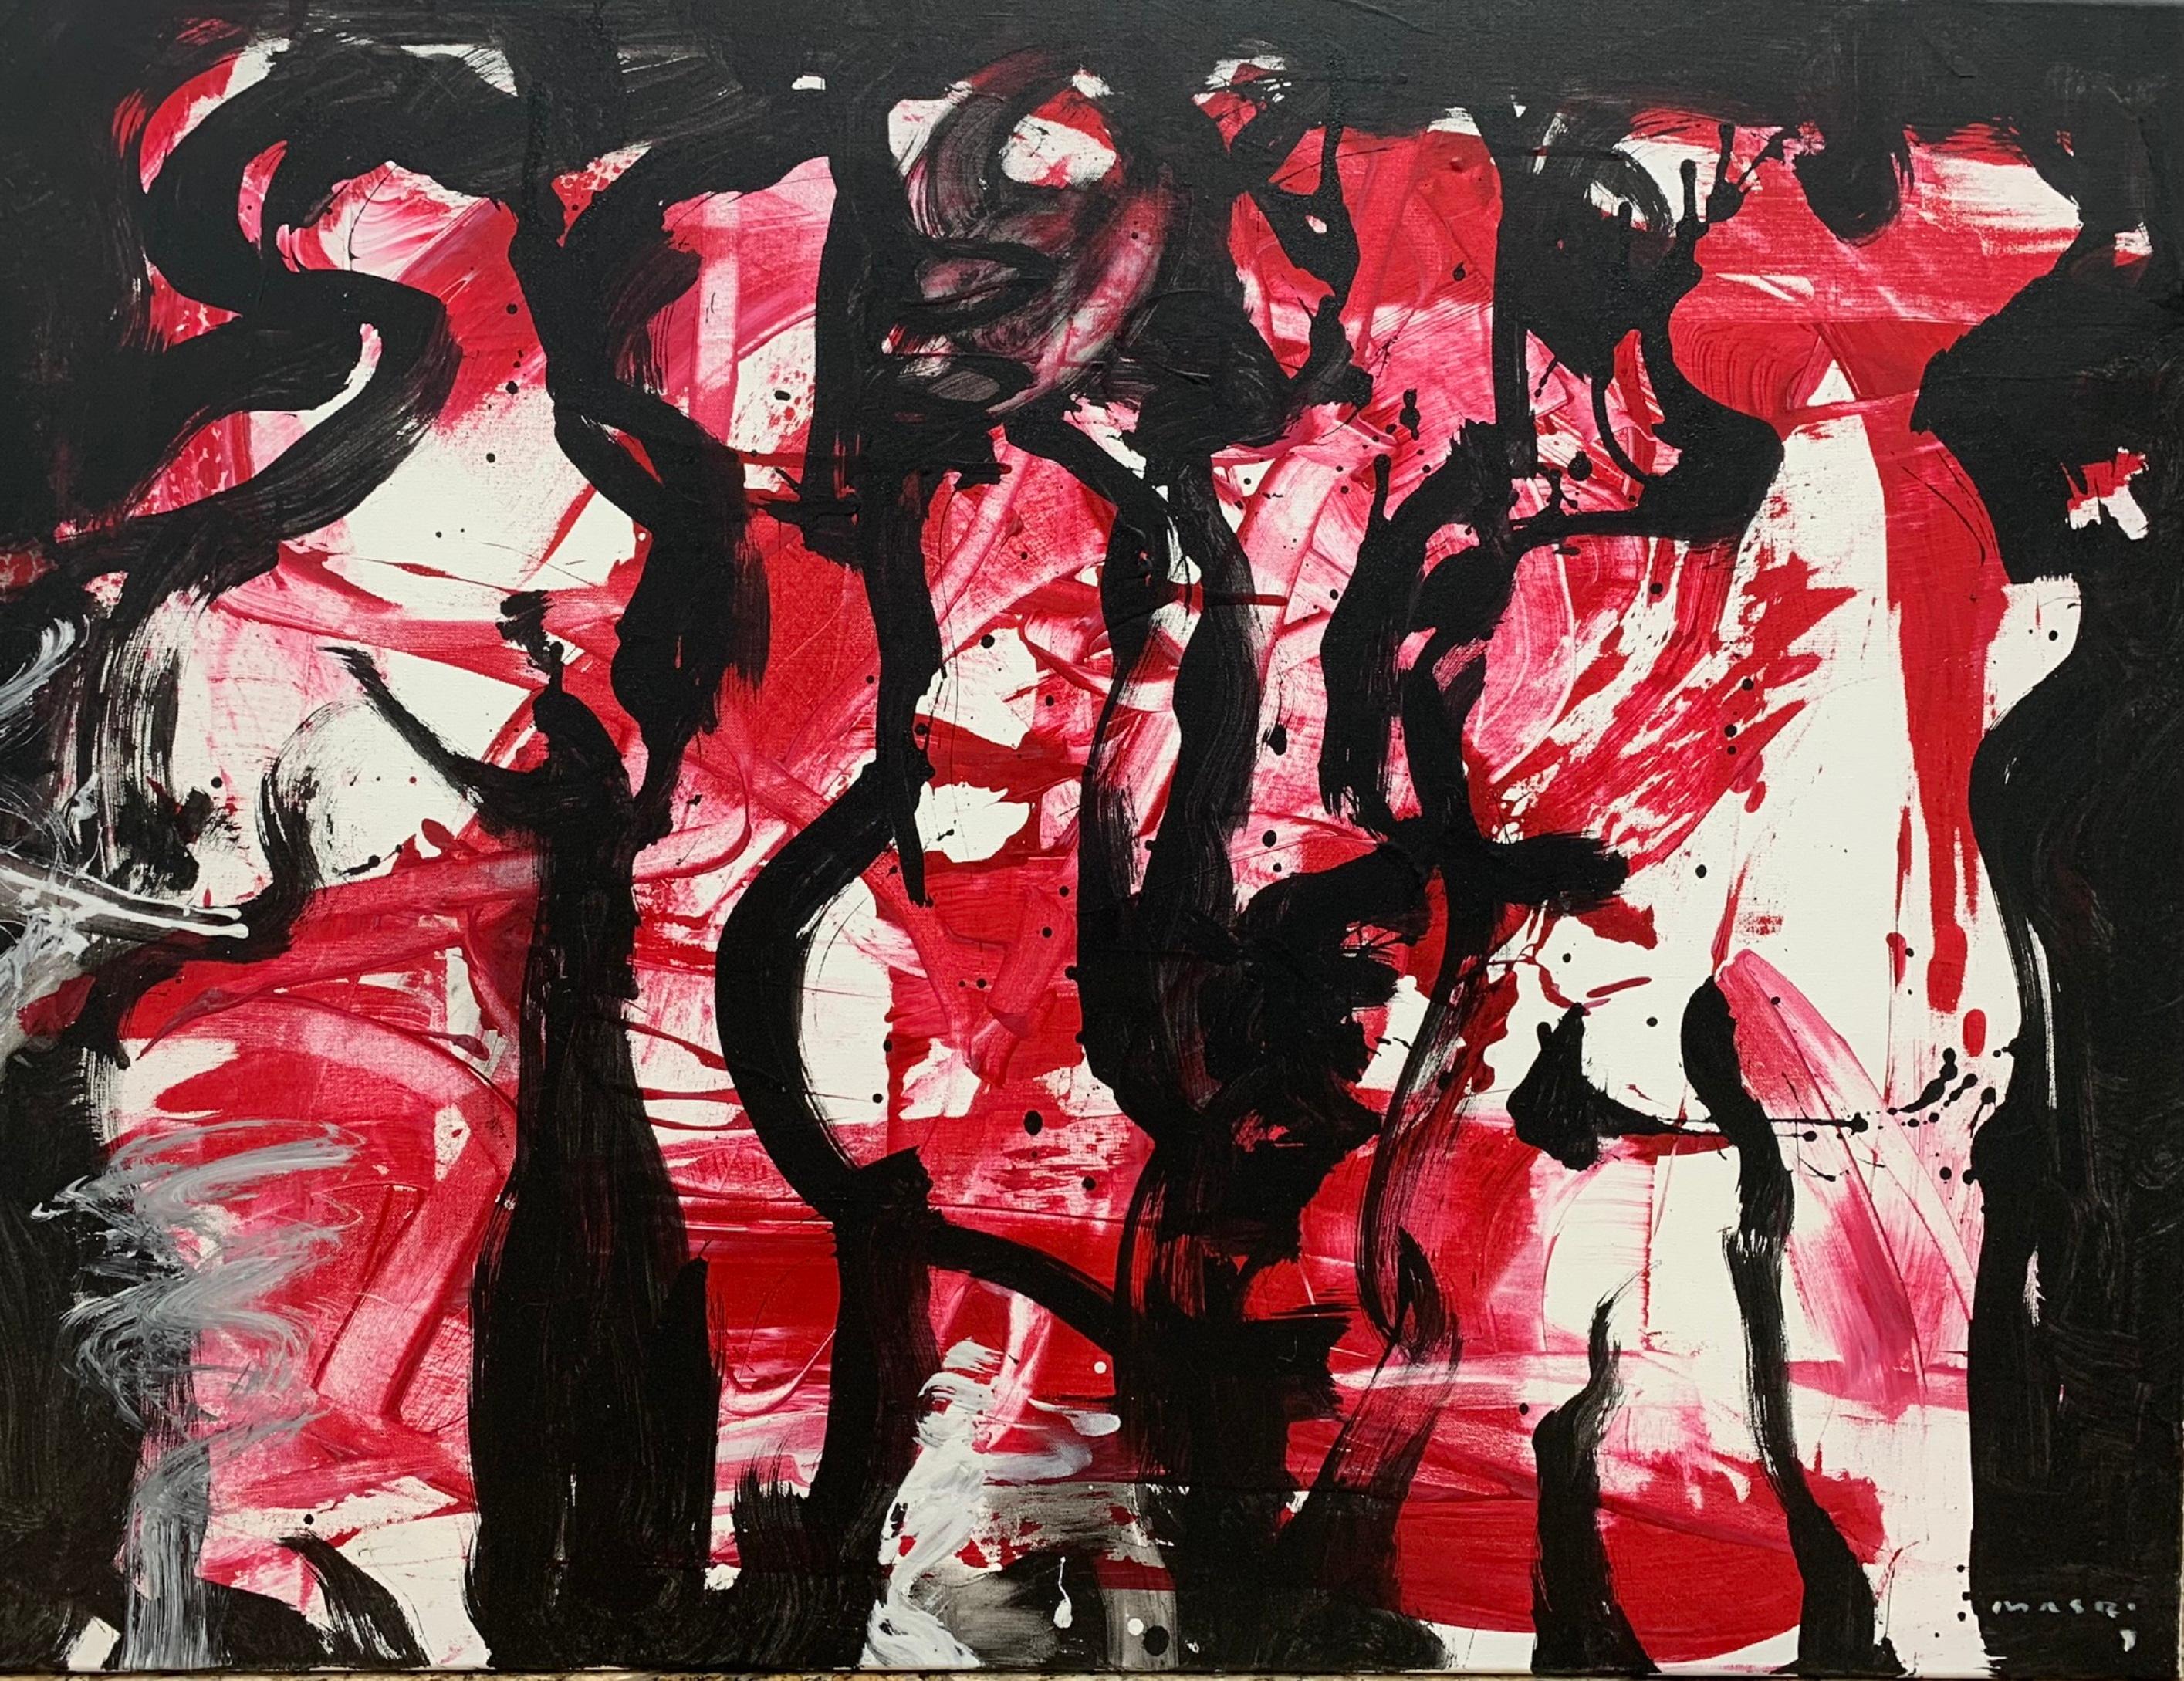 "Between B&W" Red & Black Mixed-Media Contemporary Abstract Expressionist Masri